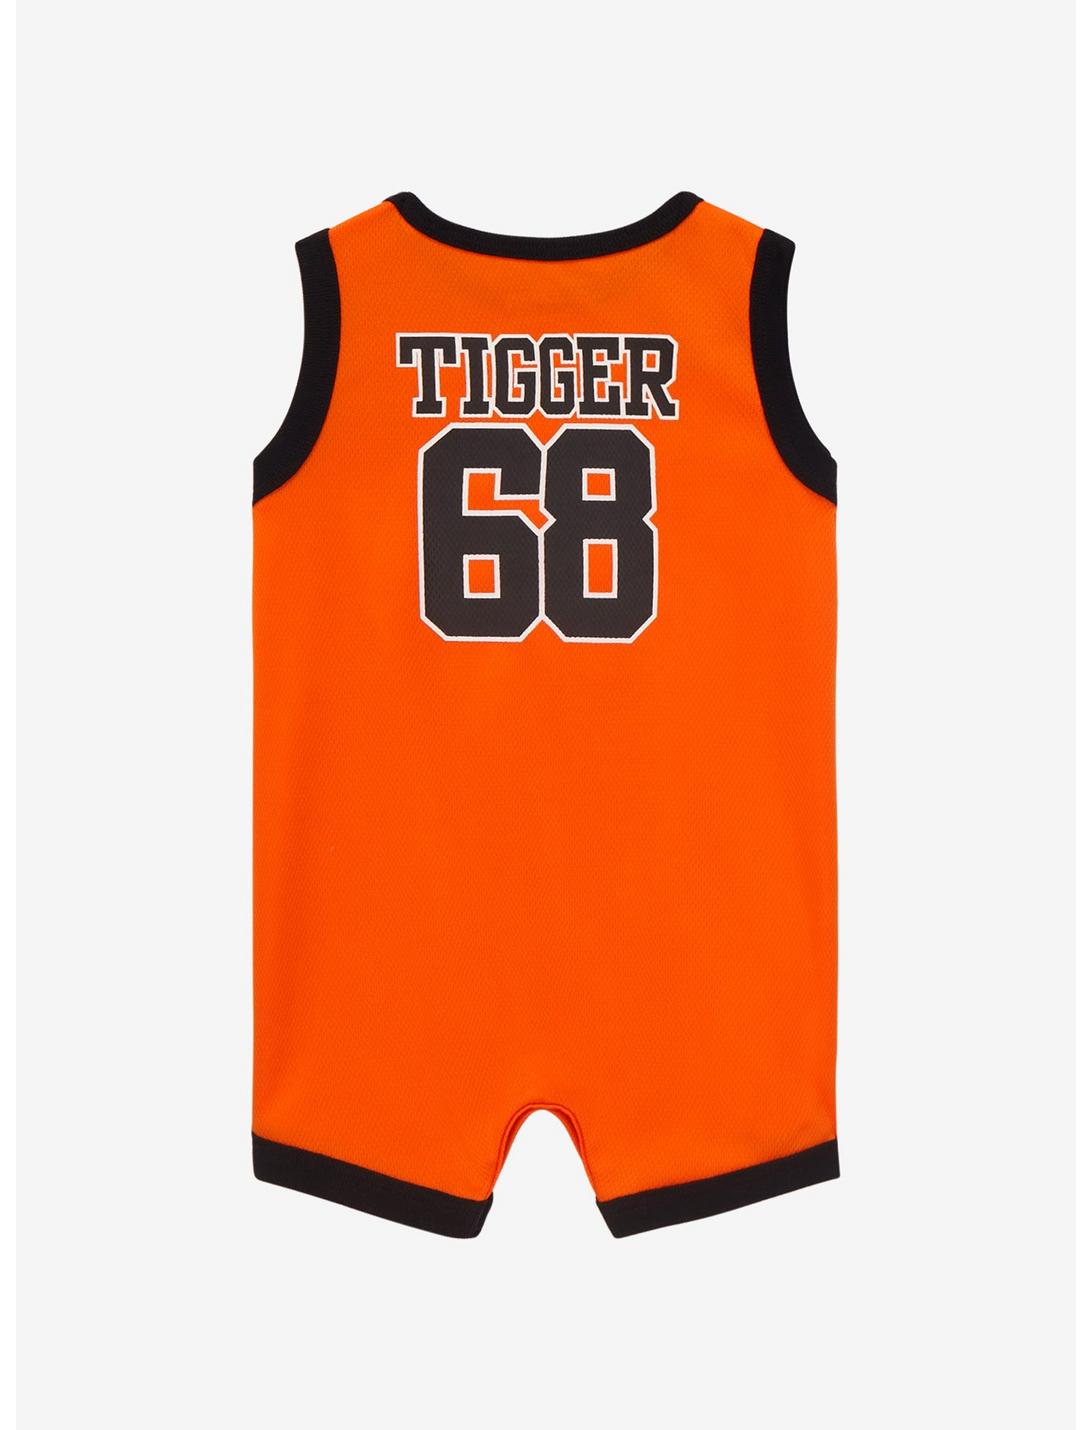 Disney Winnie the Pooh Tigger Infant Basketball Jersey Romper - BoxLunch Exclusive, ORANGE, hi-res